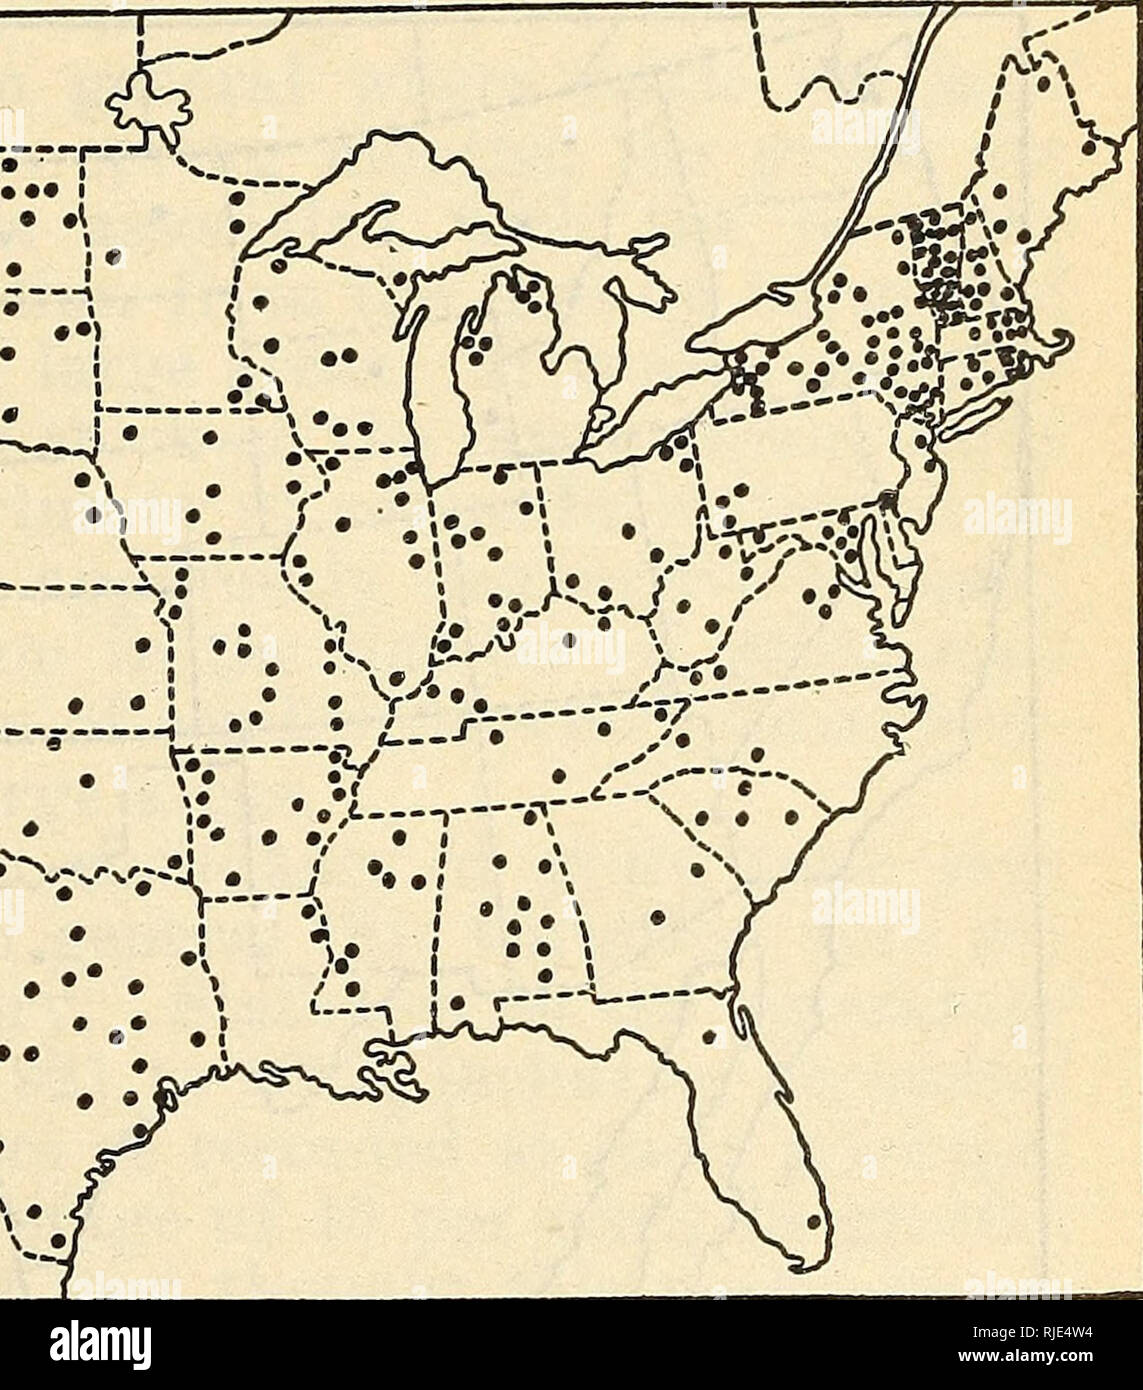 . The Cattle grubs or ox warbles, their biologies and suggestions for control. Warble flies; Cattle; Insect pests. Fig. 1.—Distribution of Hypoderma lineatum in the United States. Bach dot repre- sents a locality where this species has been collected during this investigation sumura also informed Clausen that H. ho vis occurs on cattle in the vicinity of Akita. Through correspondence and by personal examinations by agents of the bureau, the distribution of the cattle grubs in the United States and their relative abundance have been determined with fair accuracy. A summary of the information on Stock Photo